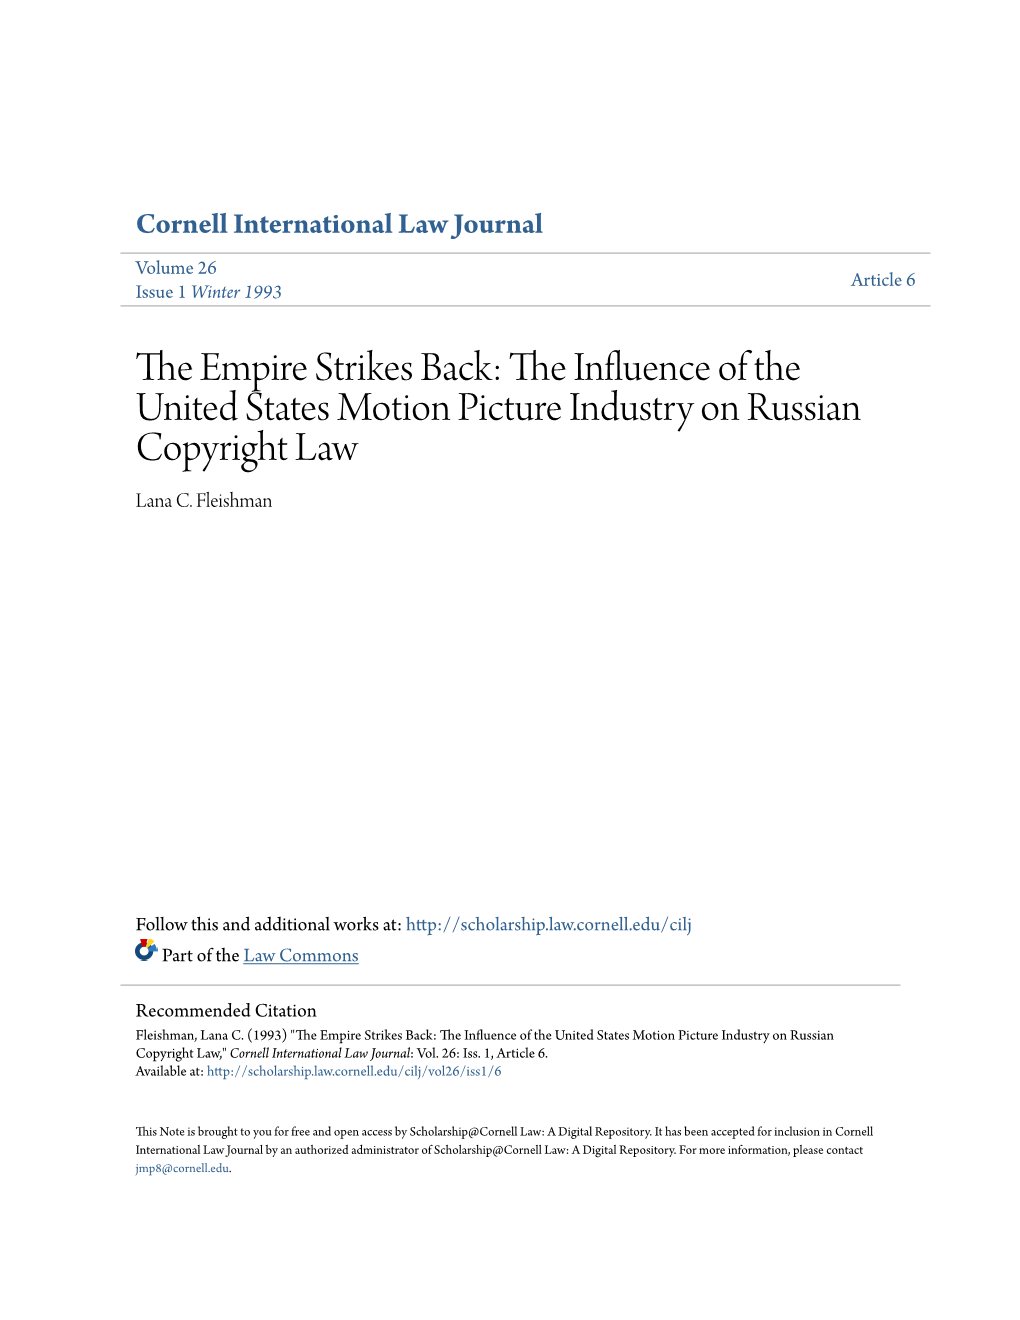 The Empire Strikes Back: the Influence of the United States Motion Picture Industry on Russian Copyright Law